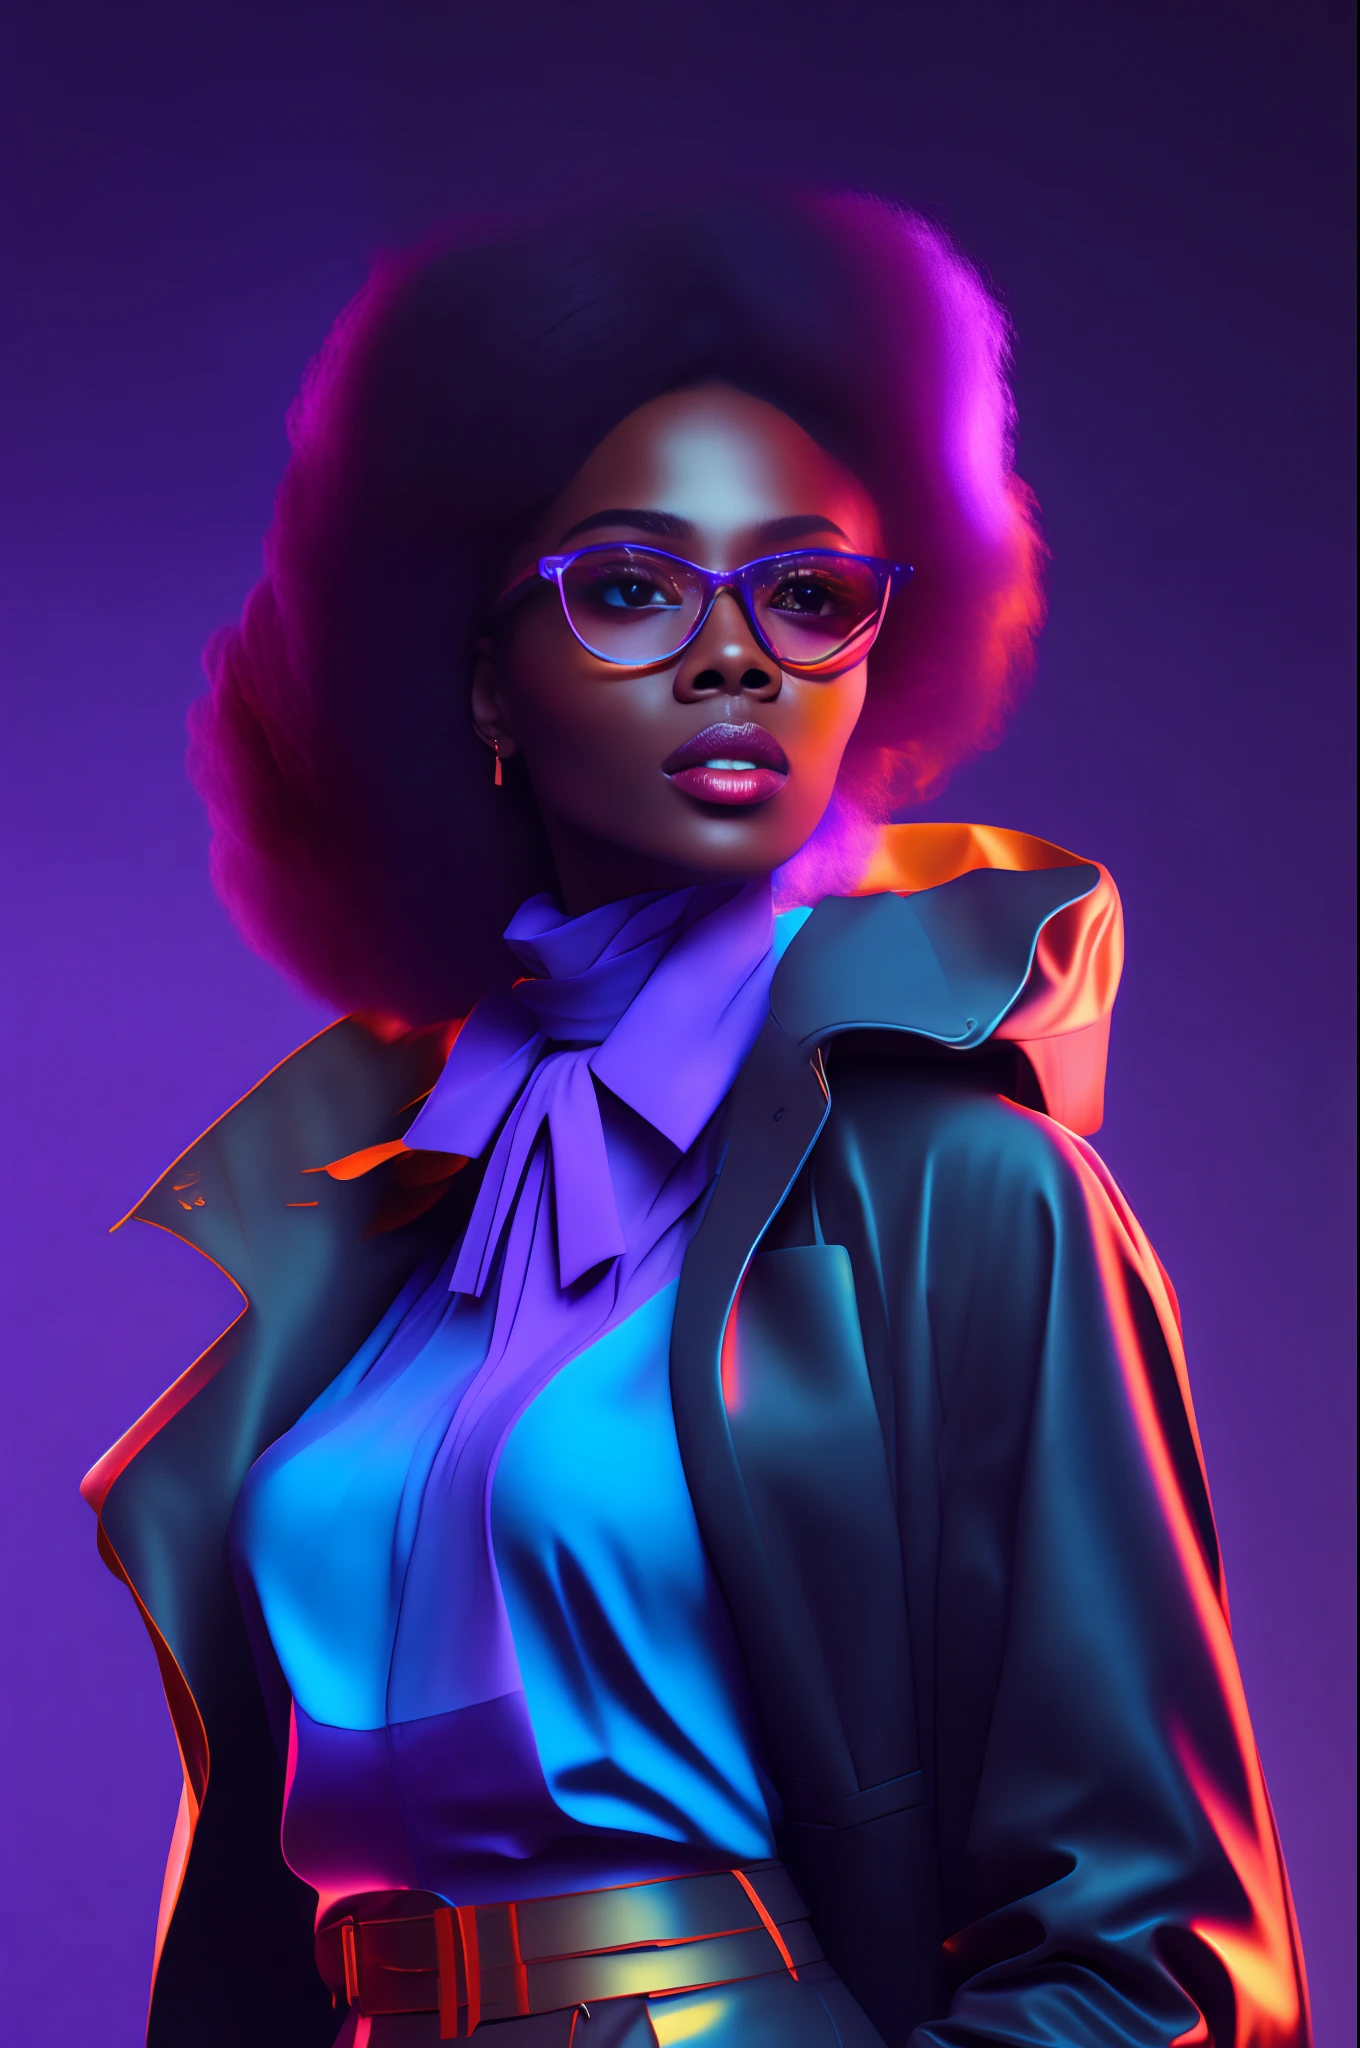 ( Full body fashionista image of an african woman with a pair of glasses,jacket and tie,( Moikano hair)  well cut, shaved on the sides 90s style, and earrings, high texture, portrait color glamour, detailed portrayal, high-quality portrait, neon color bleed, colorized portrait, Studio portrait , colors ultravioleta e neon, illustration,  sheen, god damn, to loan, 8K, octan render, 4d cinema, Blender, Global lighting on the face, Ultra-detailed atmospheric 8K, cinematic sensual, sharp focus, humorous illustration, big depth of field, Masterpiece artwork, colors, 3d octane render, 4K, conceptual artwork,  trending in artstation, hyper realist, colors pastel, ring light, extremamente detalhado CG unidade 8K papel de parede, trending in artstation, trend in CGSociety, Pop Art style by Tom Nulens, intrikate, High detail, lighting dramatic, High Detail neon backgrounds, Dramatic , pure energy, light particles, scientific fiction